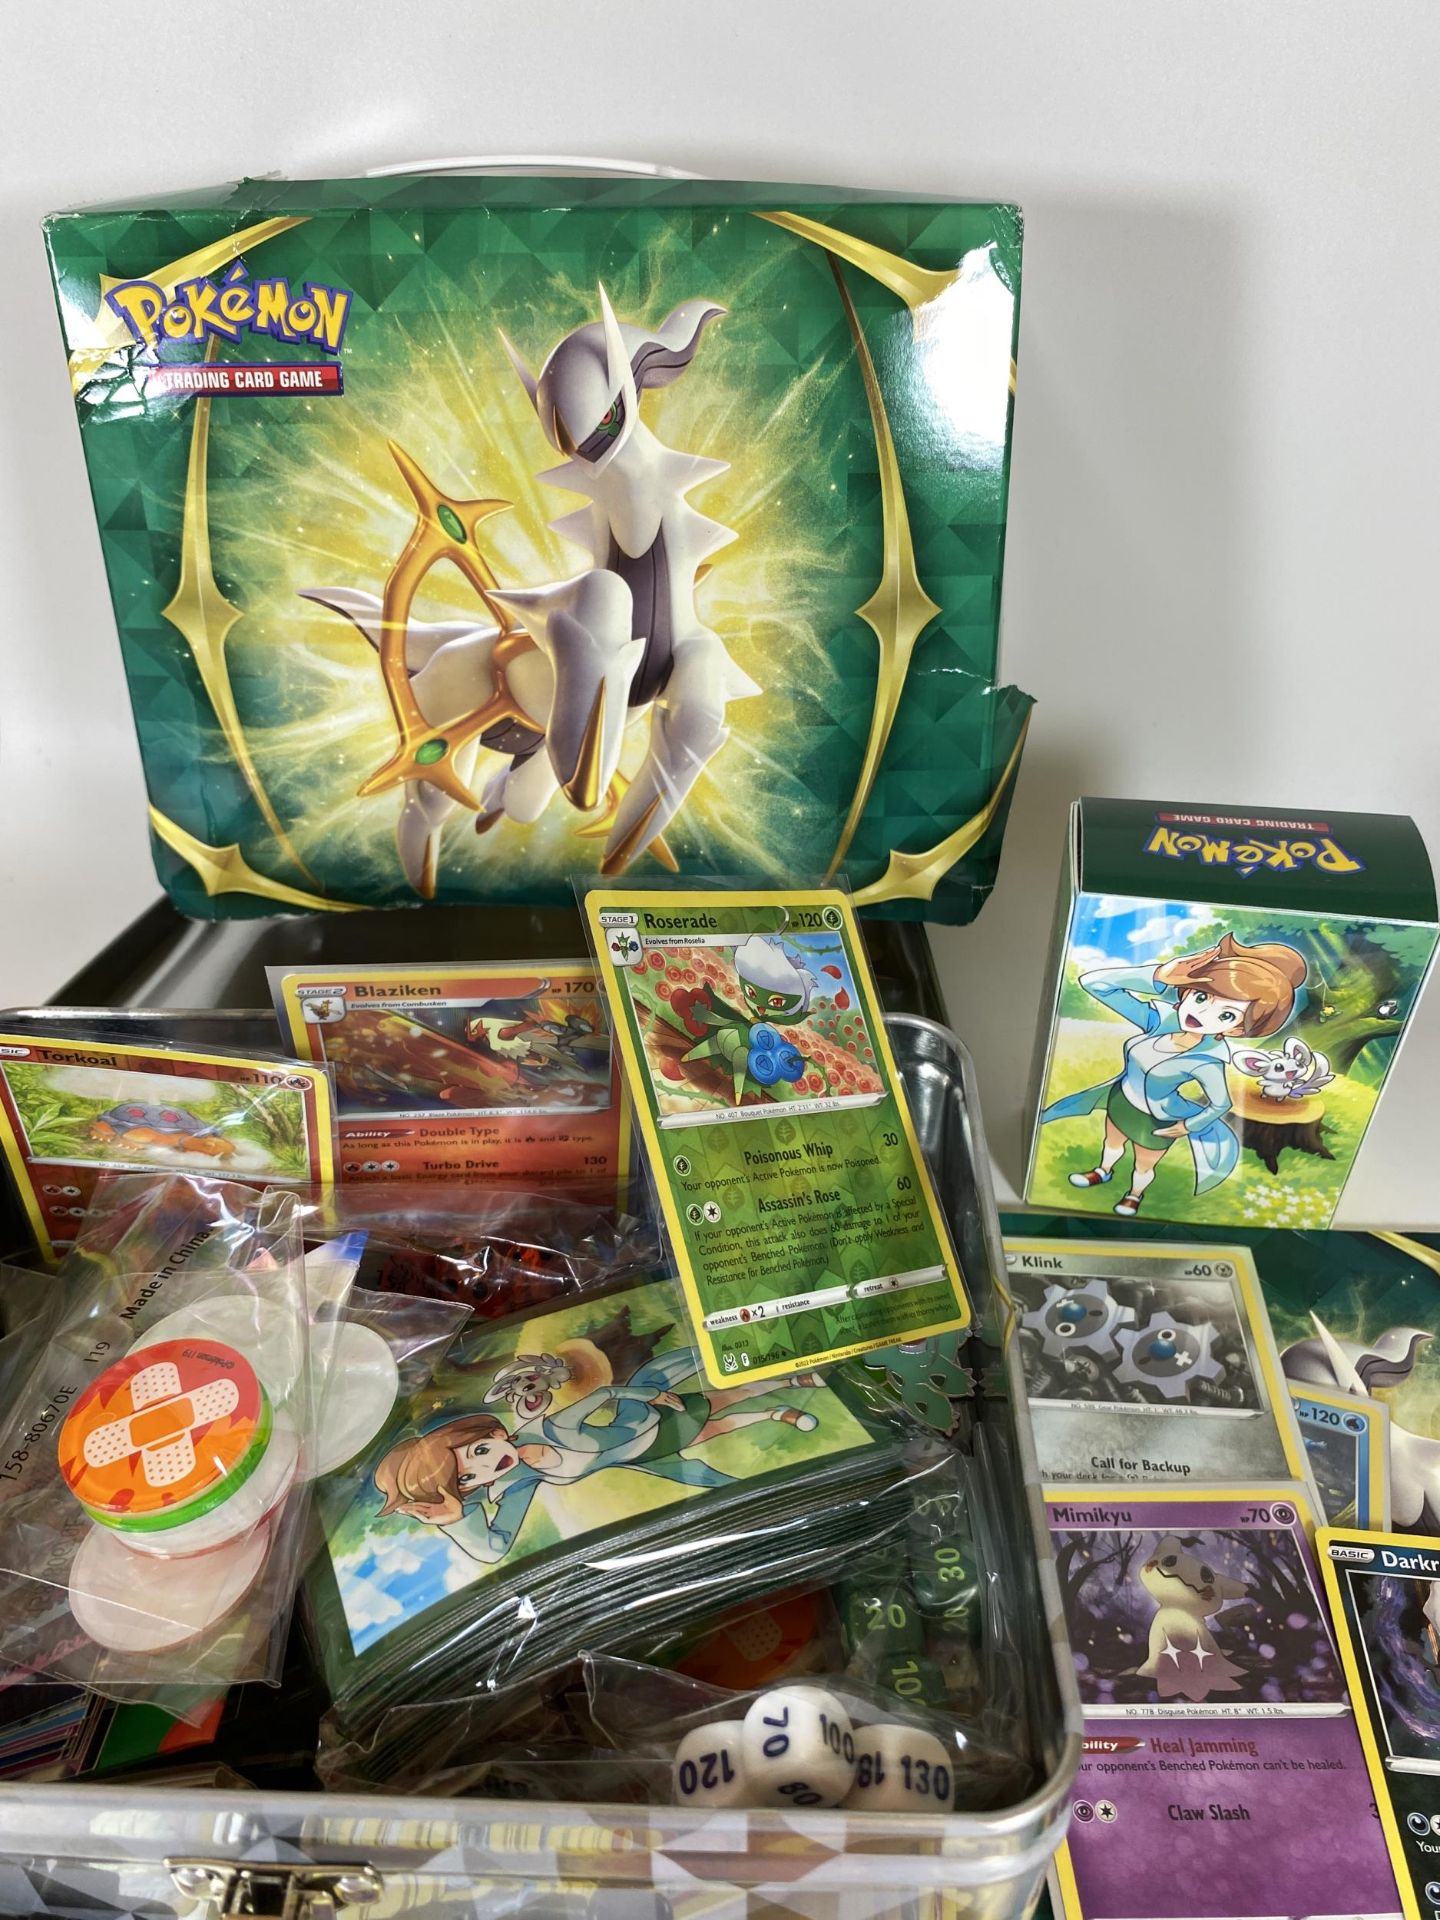 A POKEMON TIN TRAINER BOX FULL OF CARDS, GAME COUNTERS, RARES, HOLOS ETC - Image 3 of 5